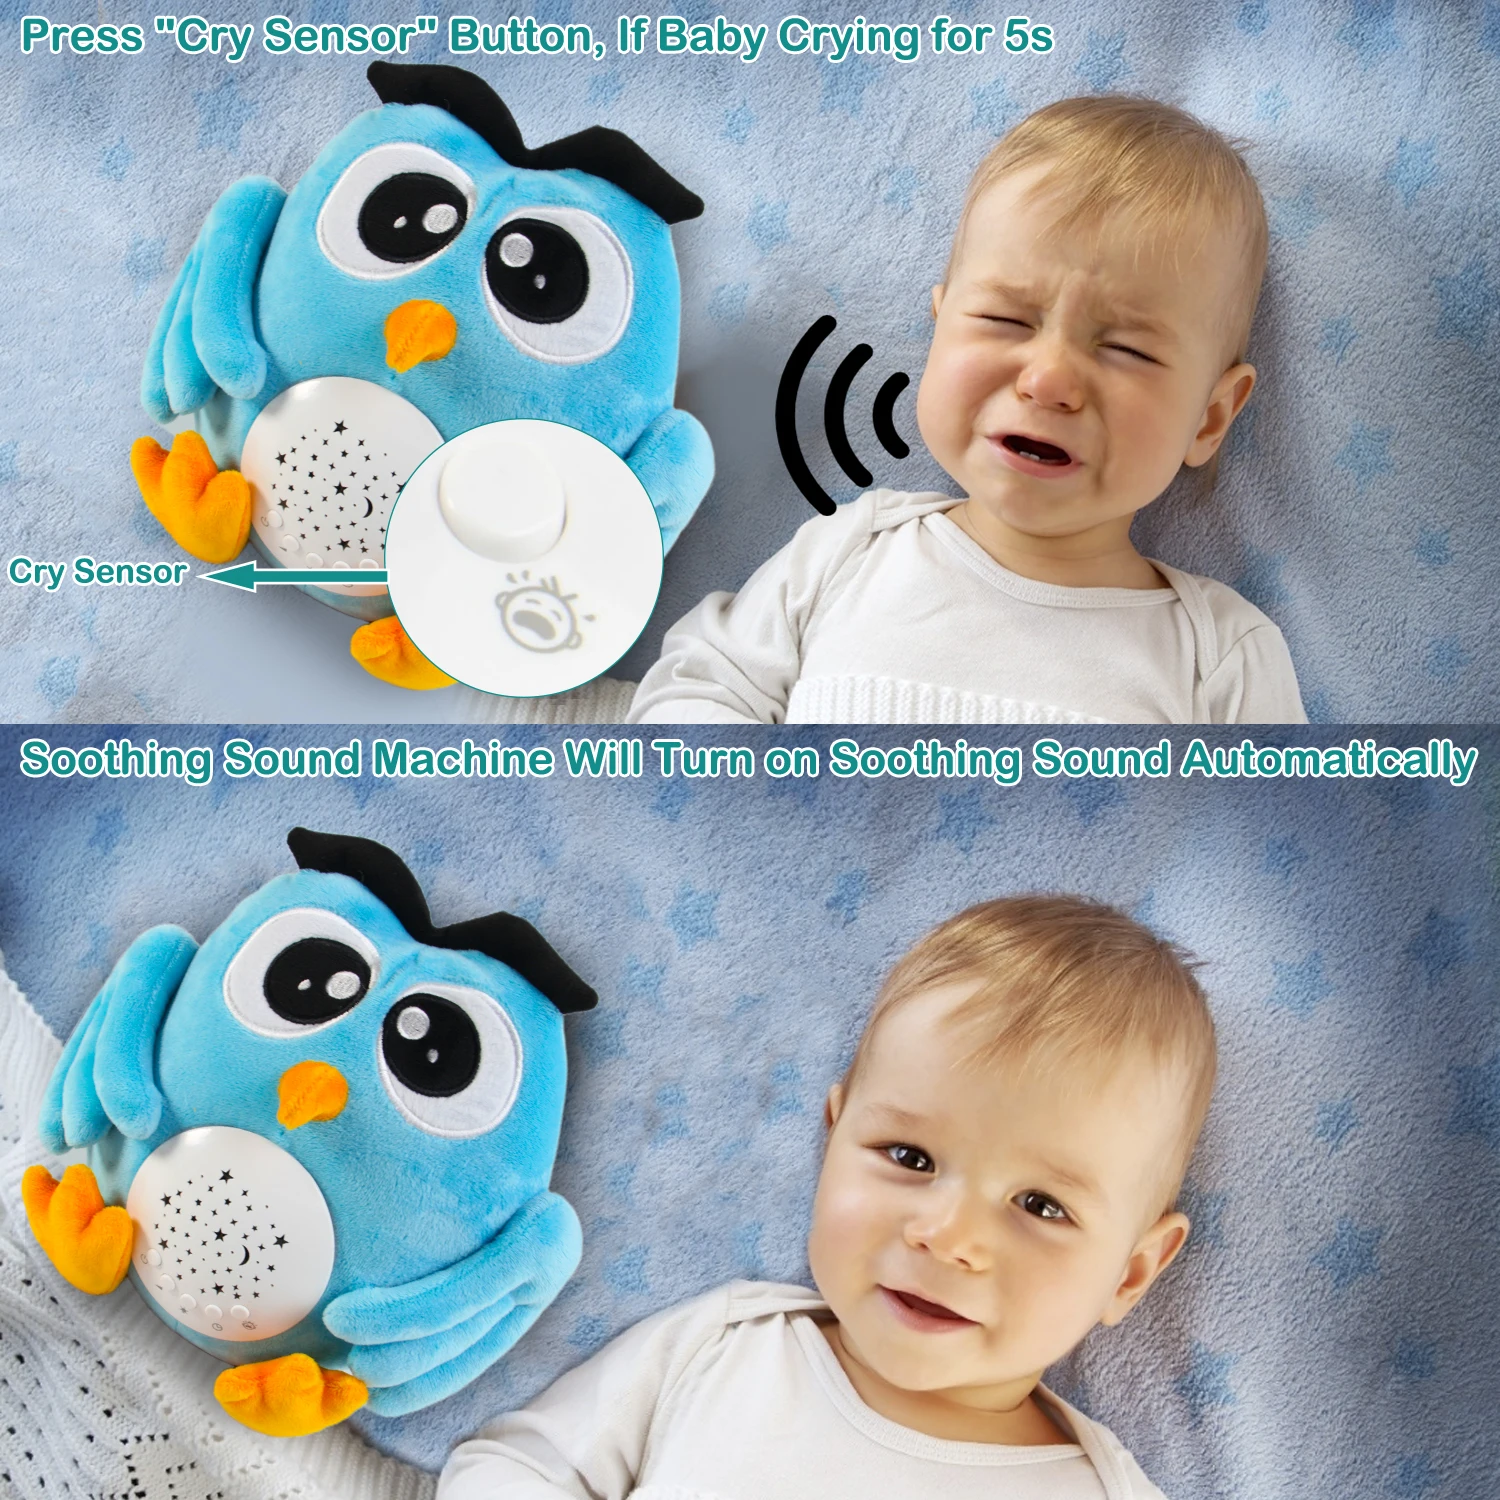 Baby Sleep Aid Stuffed Owl Plush Toy Soothing White Noise Sound LED Star Projector